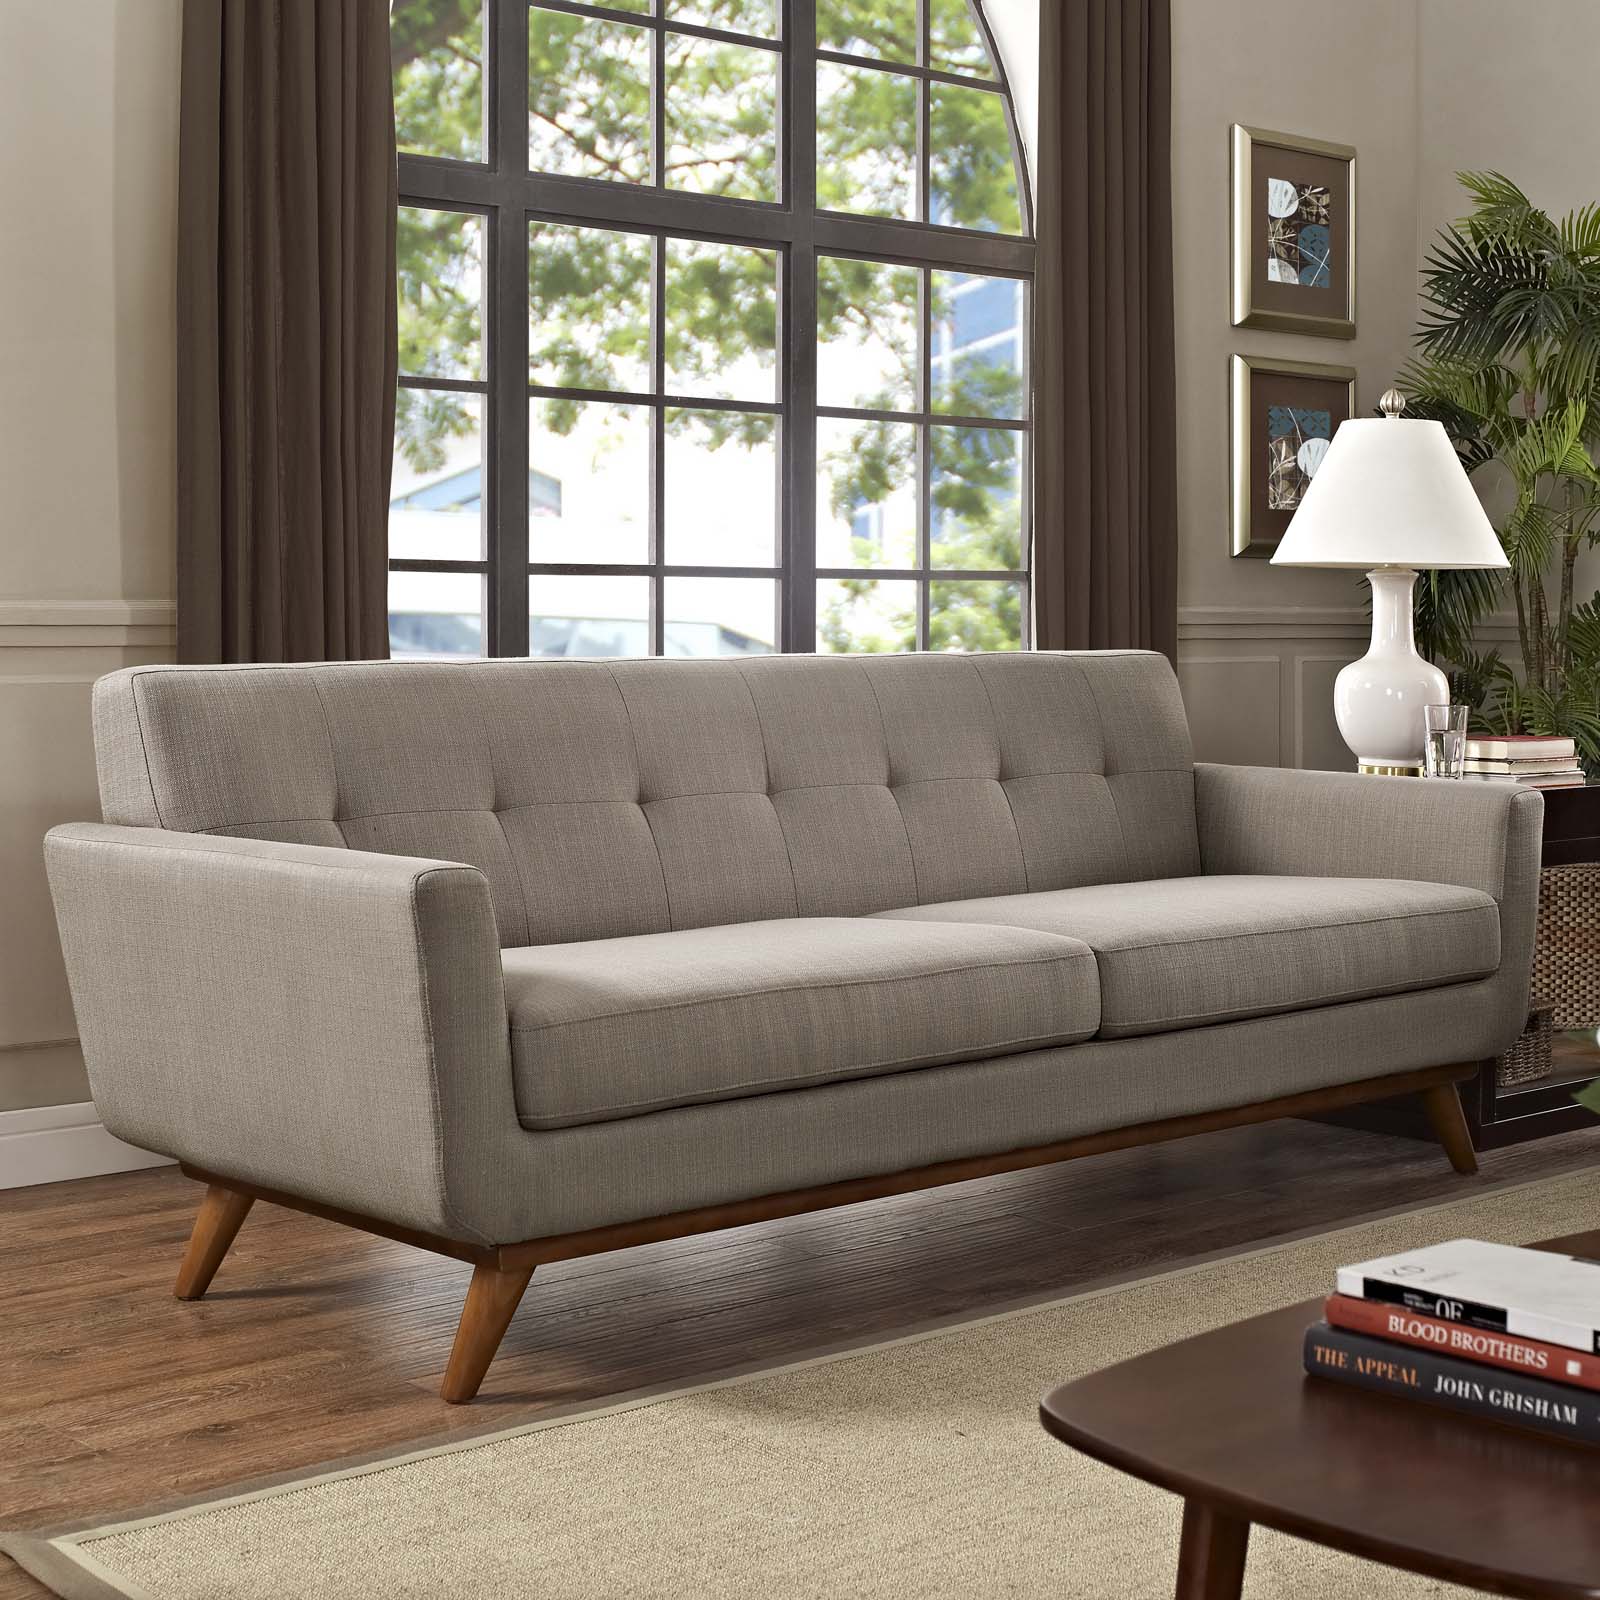 Modway Sofas & Couches - Engage Upholstered Fabric Sofa Granite